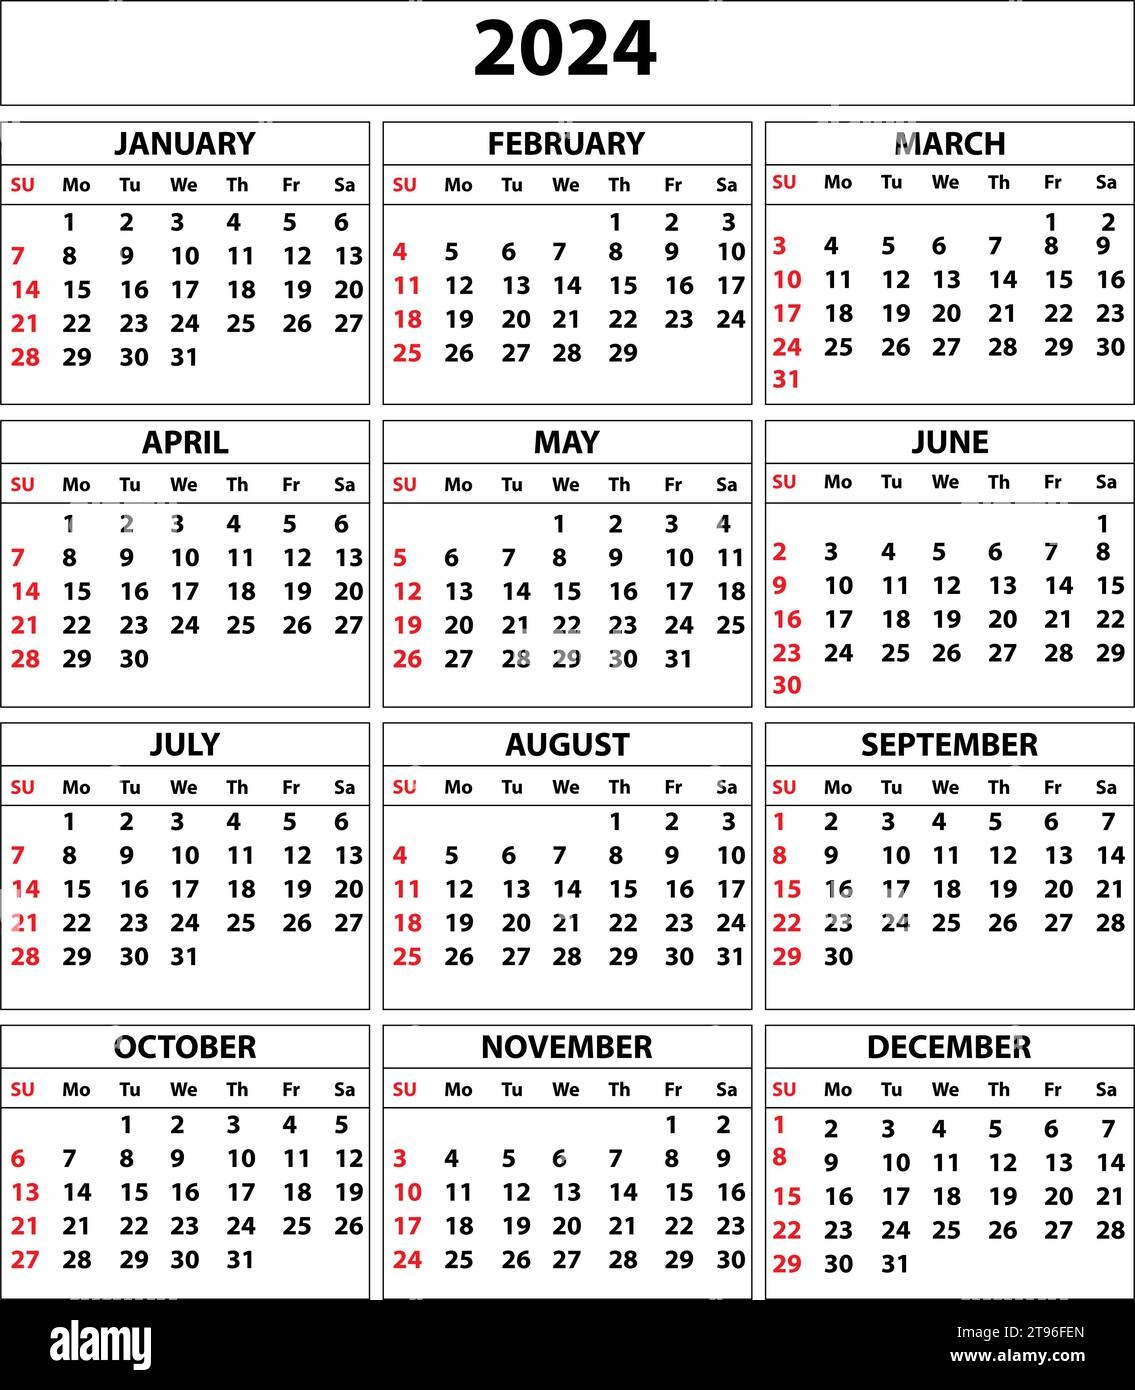 2024 Calendar Set. Color Vector Pocket Calendar Design. The Week with May and June and July 2024 Calendar